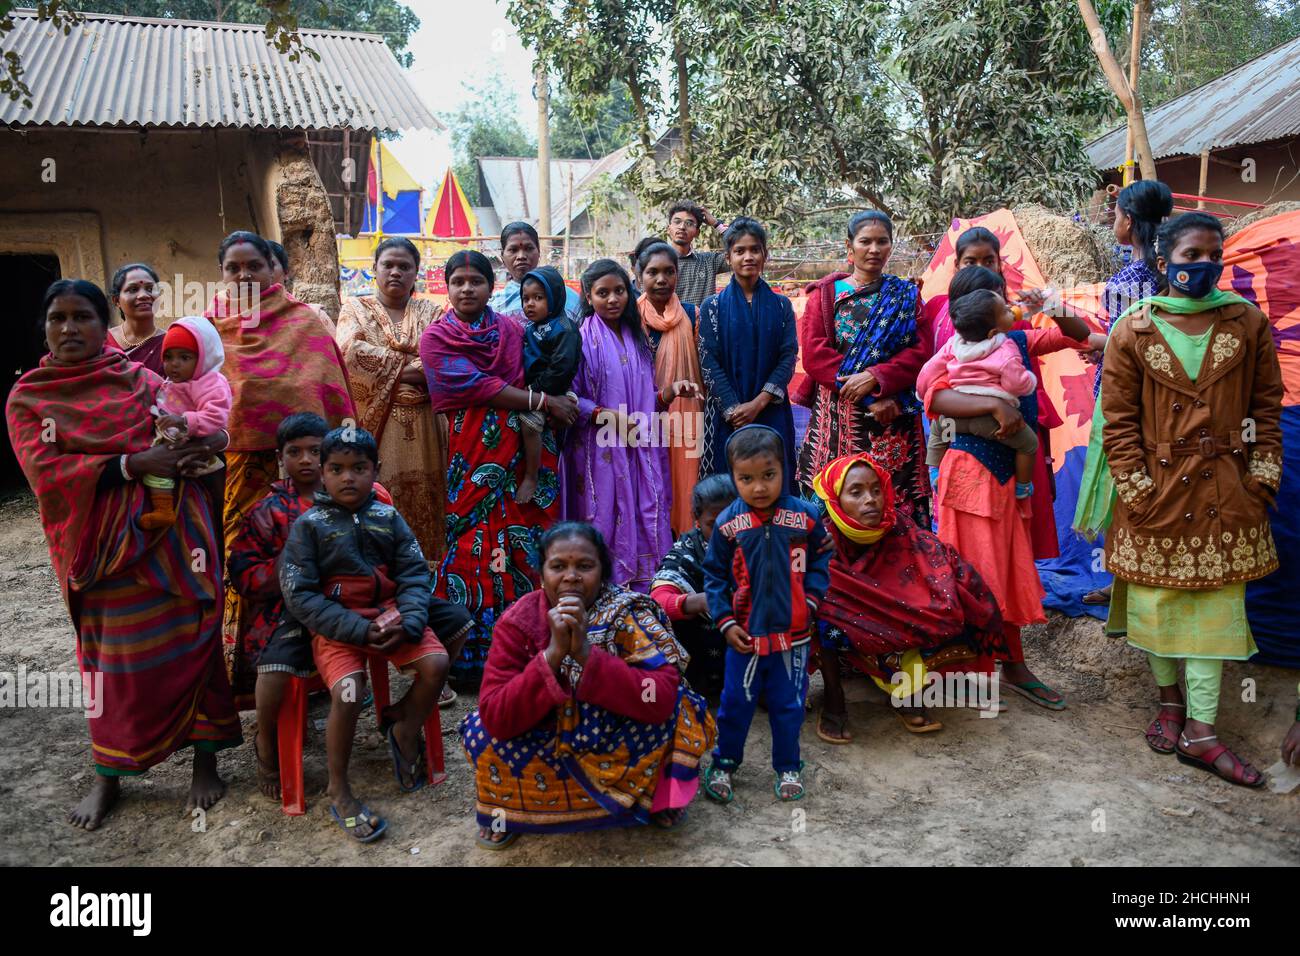 Rajshahi, Bangladesh. 28th Dec, 2021. Santali people posing for a group photo at a wedding in Rajshahi.Santal tribe is an ethnic group native to eastern India. Santals are the largest tribe in the Jharkhand state of India in terms of population and are also found in the states of Assam, Tripura, Bihar, Odisha and West Bengal. They are the largest ethnic minority in northern Bangladesh's Rajshahi Division and Rangpur Division. (Photo by Piyas Biswas/SOPA Images/Sipa USA) Credit: Sipa USA/Alamy Live News Stock Photo